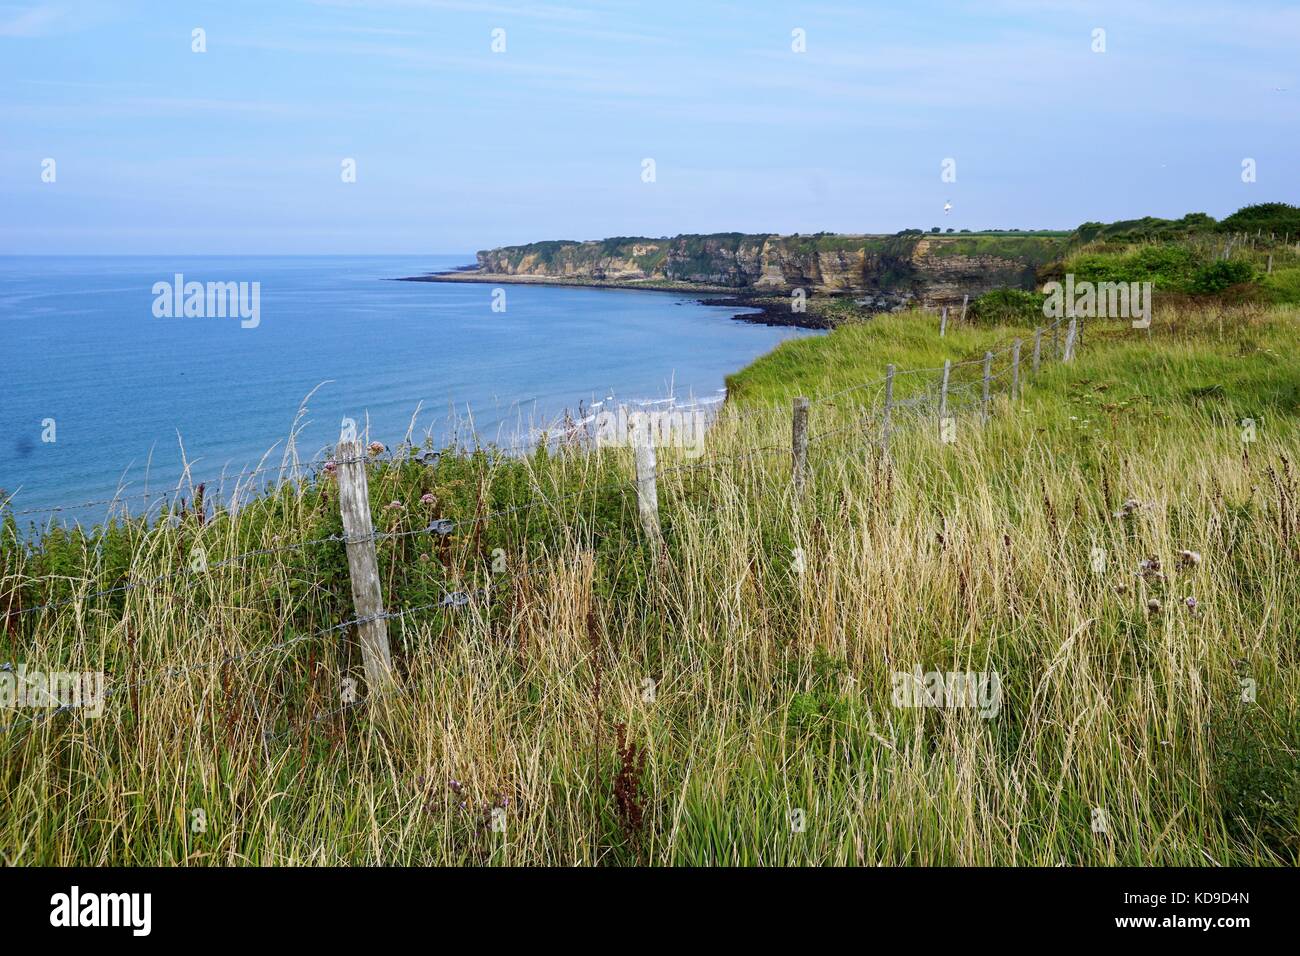 coastline/cliffs surrounded by grass, weeds & mud against a blue sky Stock Photo